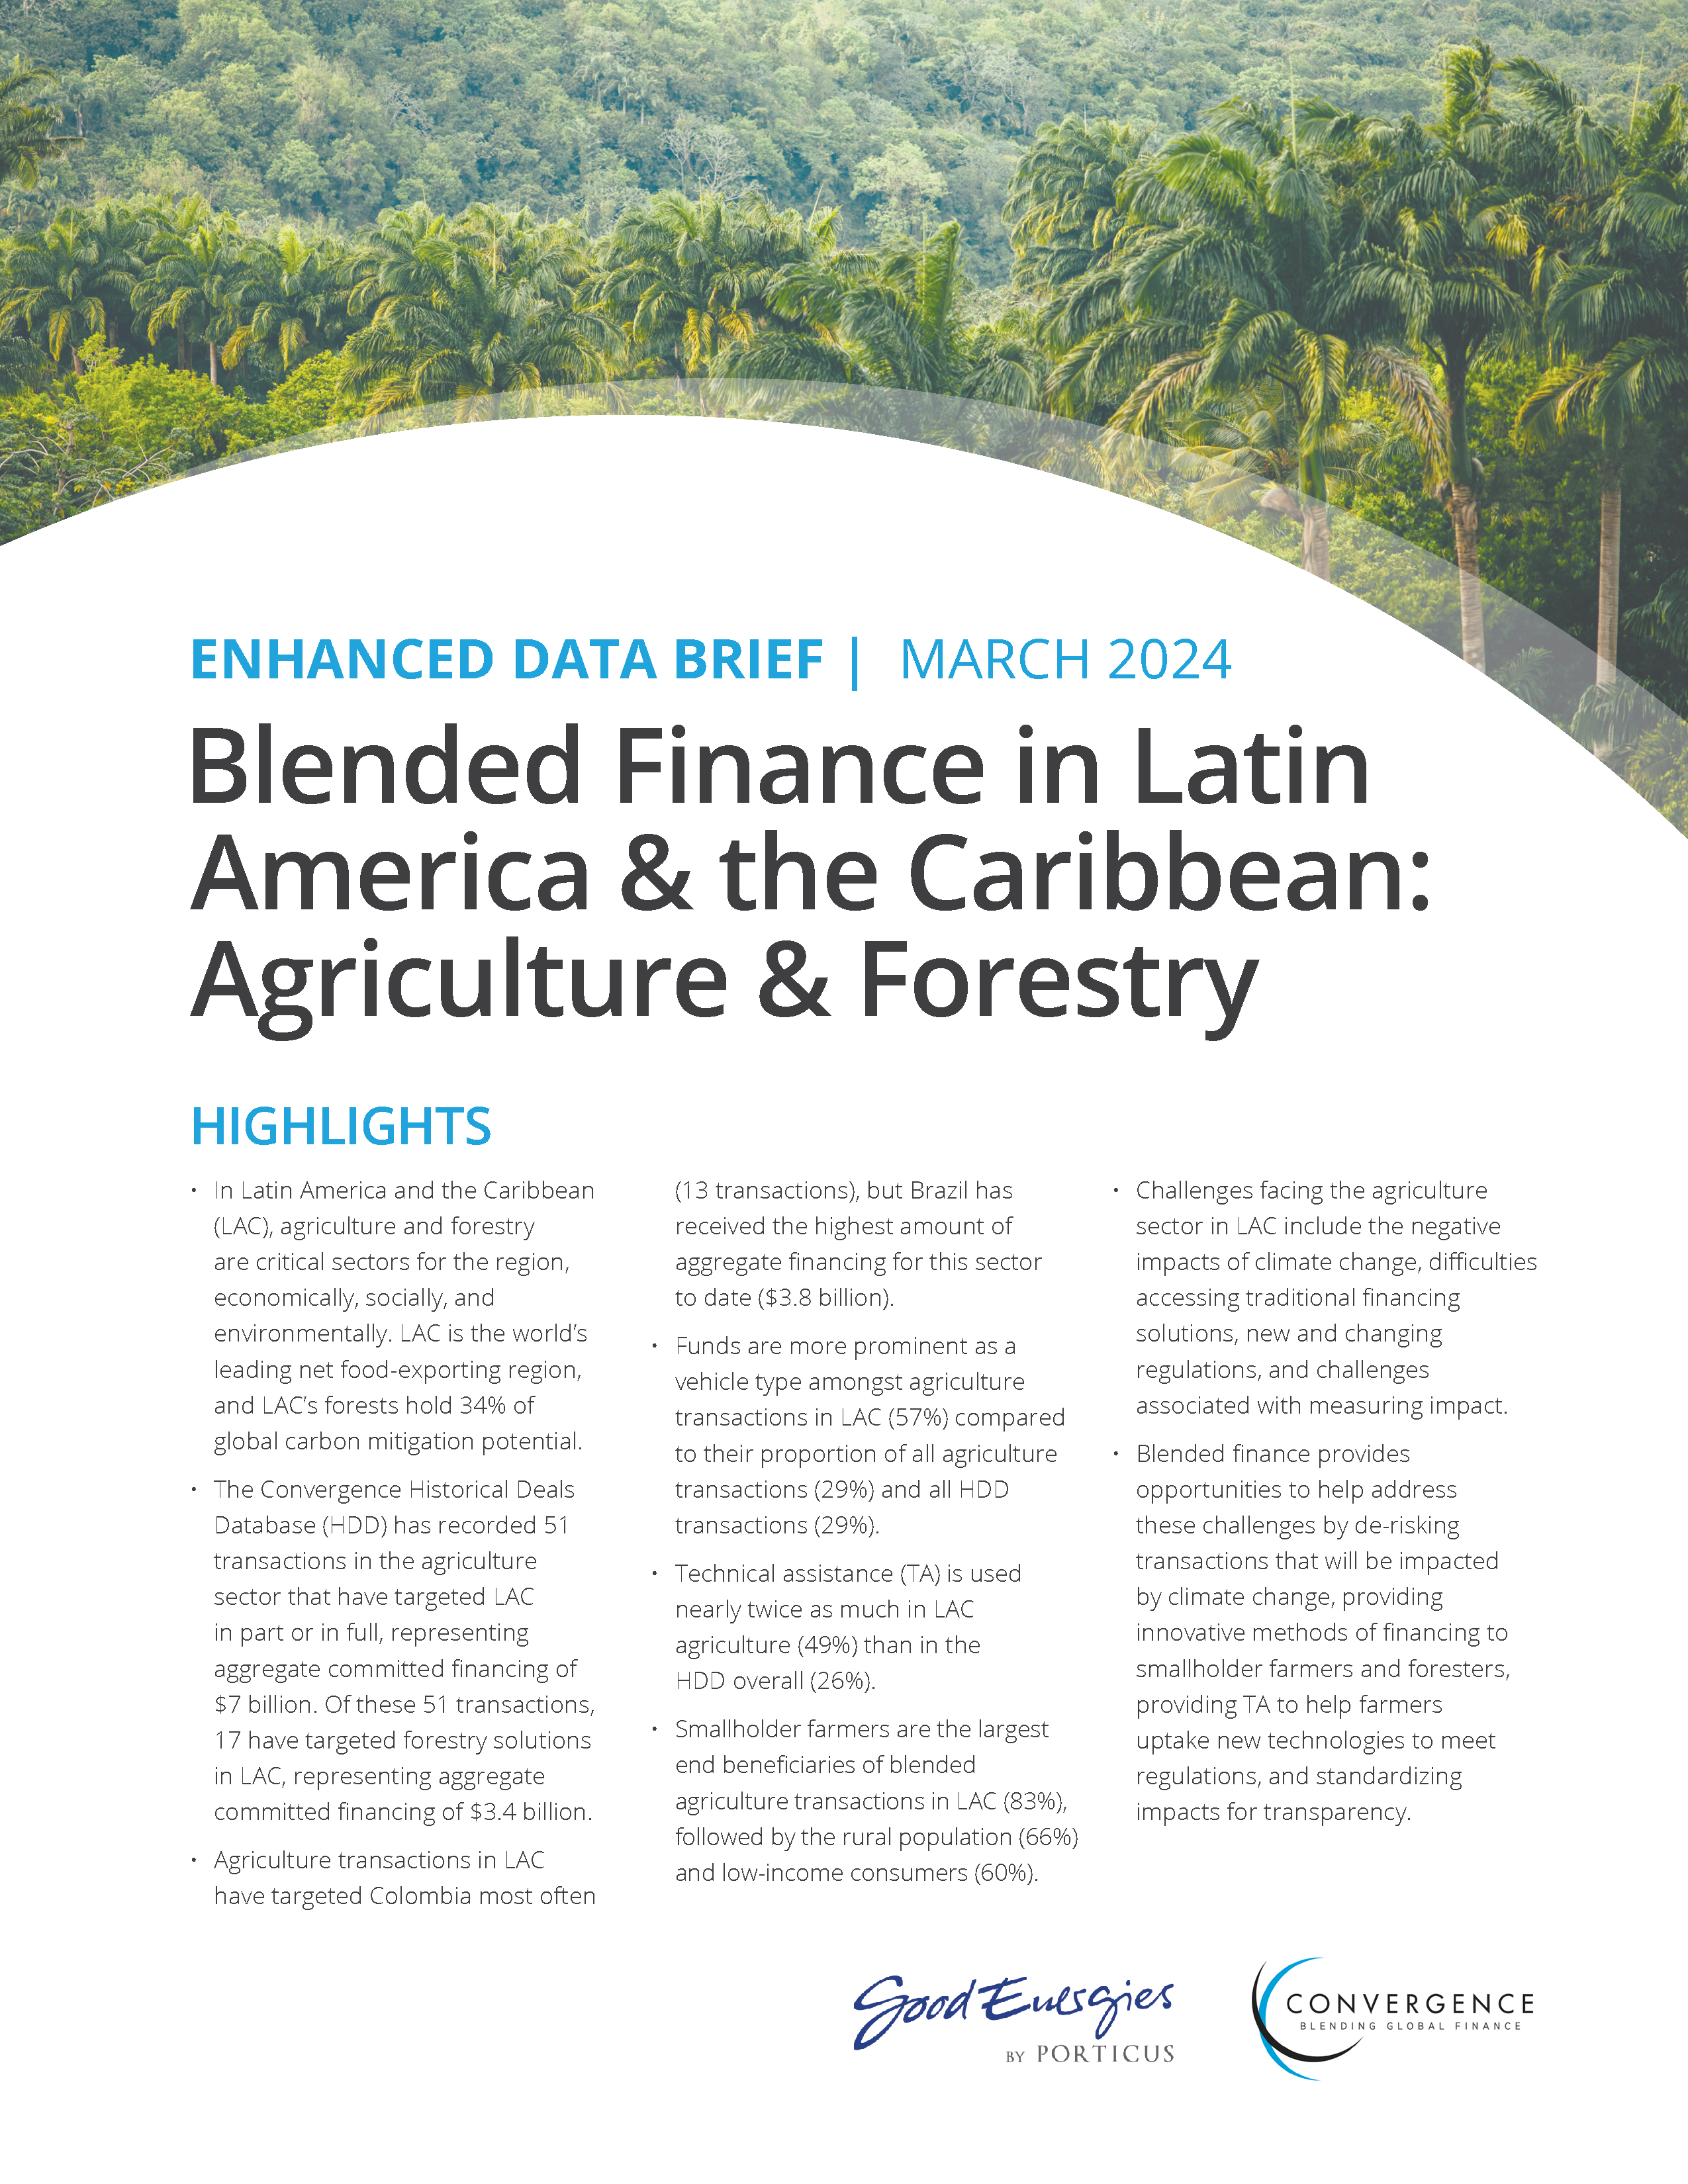 Blended Finance in Latin America and the Caribbean: Agriculture and Forestry